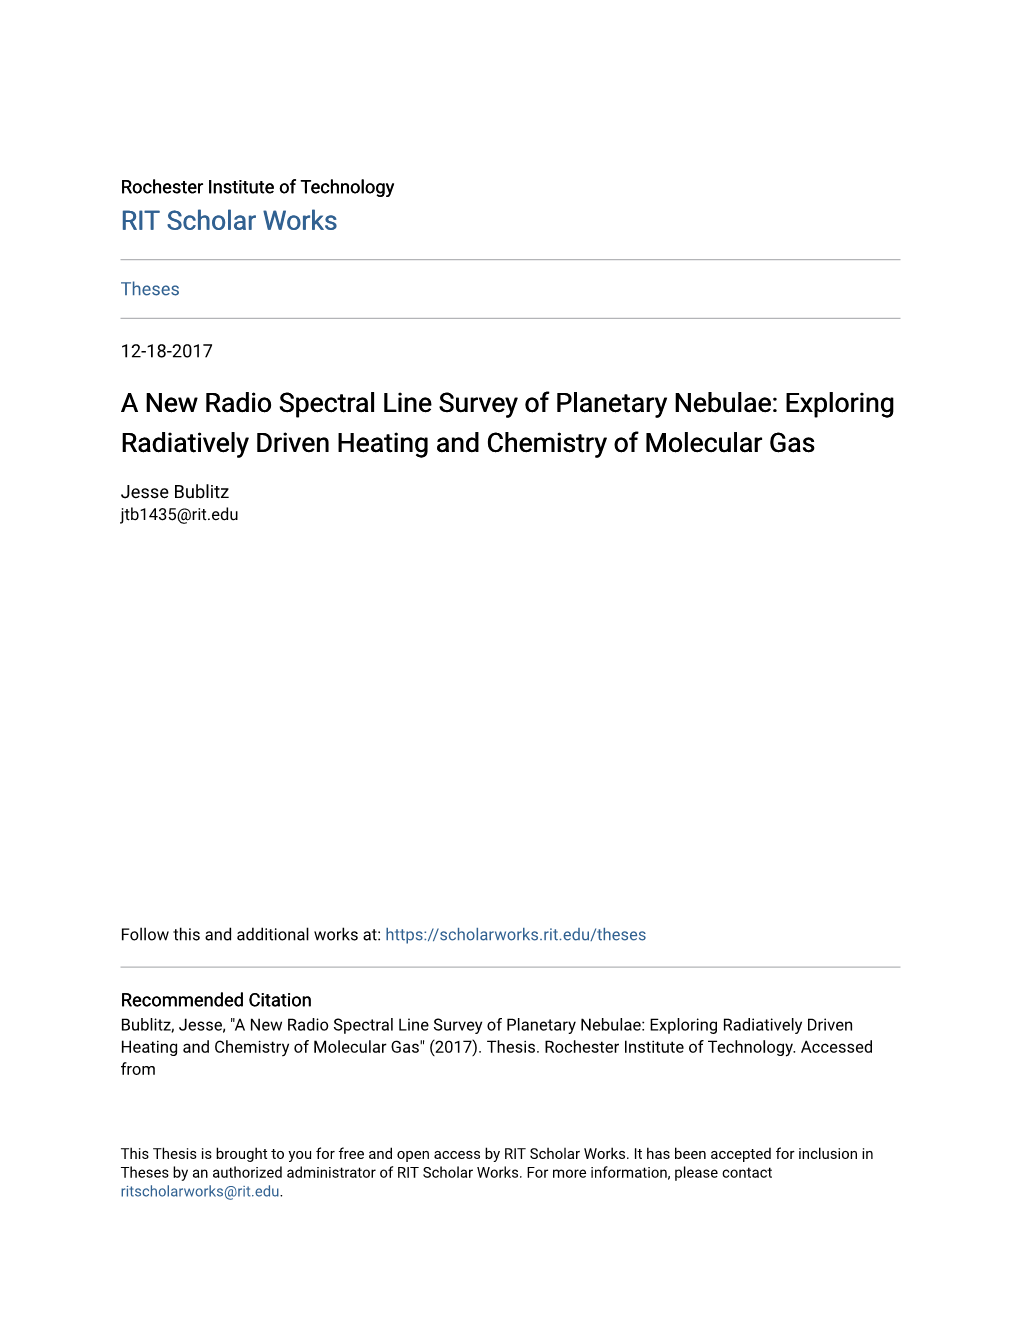 A New Radio Spectral Line Survey of Planetary Nebulae: Exploring Radiatively Driven Heating and Chemistry of Molecular Gas